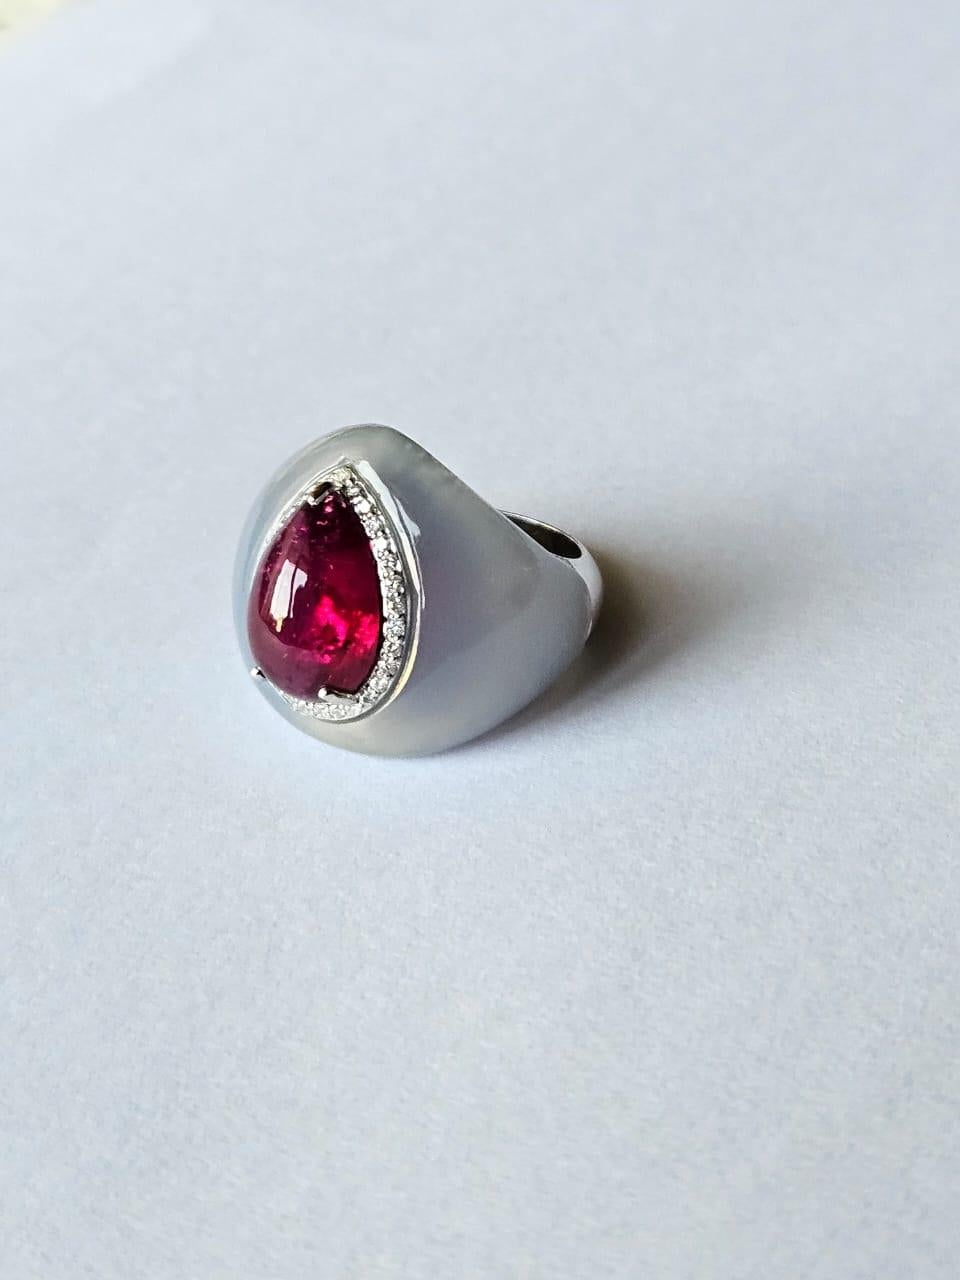 Cabochon Set in 18K Gold, 5.52 carats Rubellite, Chalcedony & Diamonds Cocktail Ring